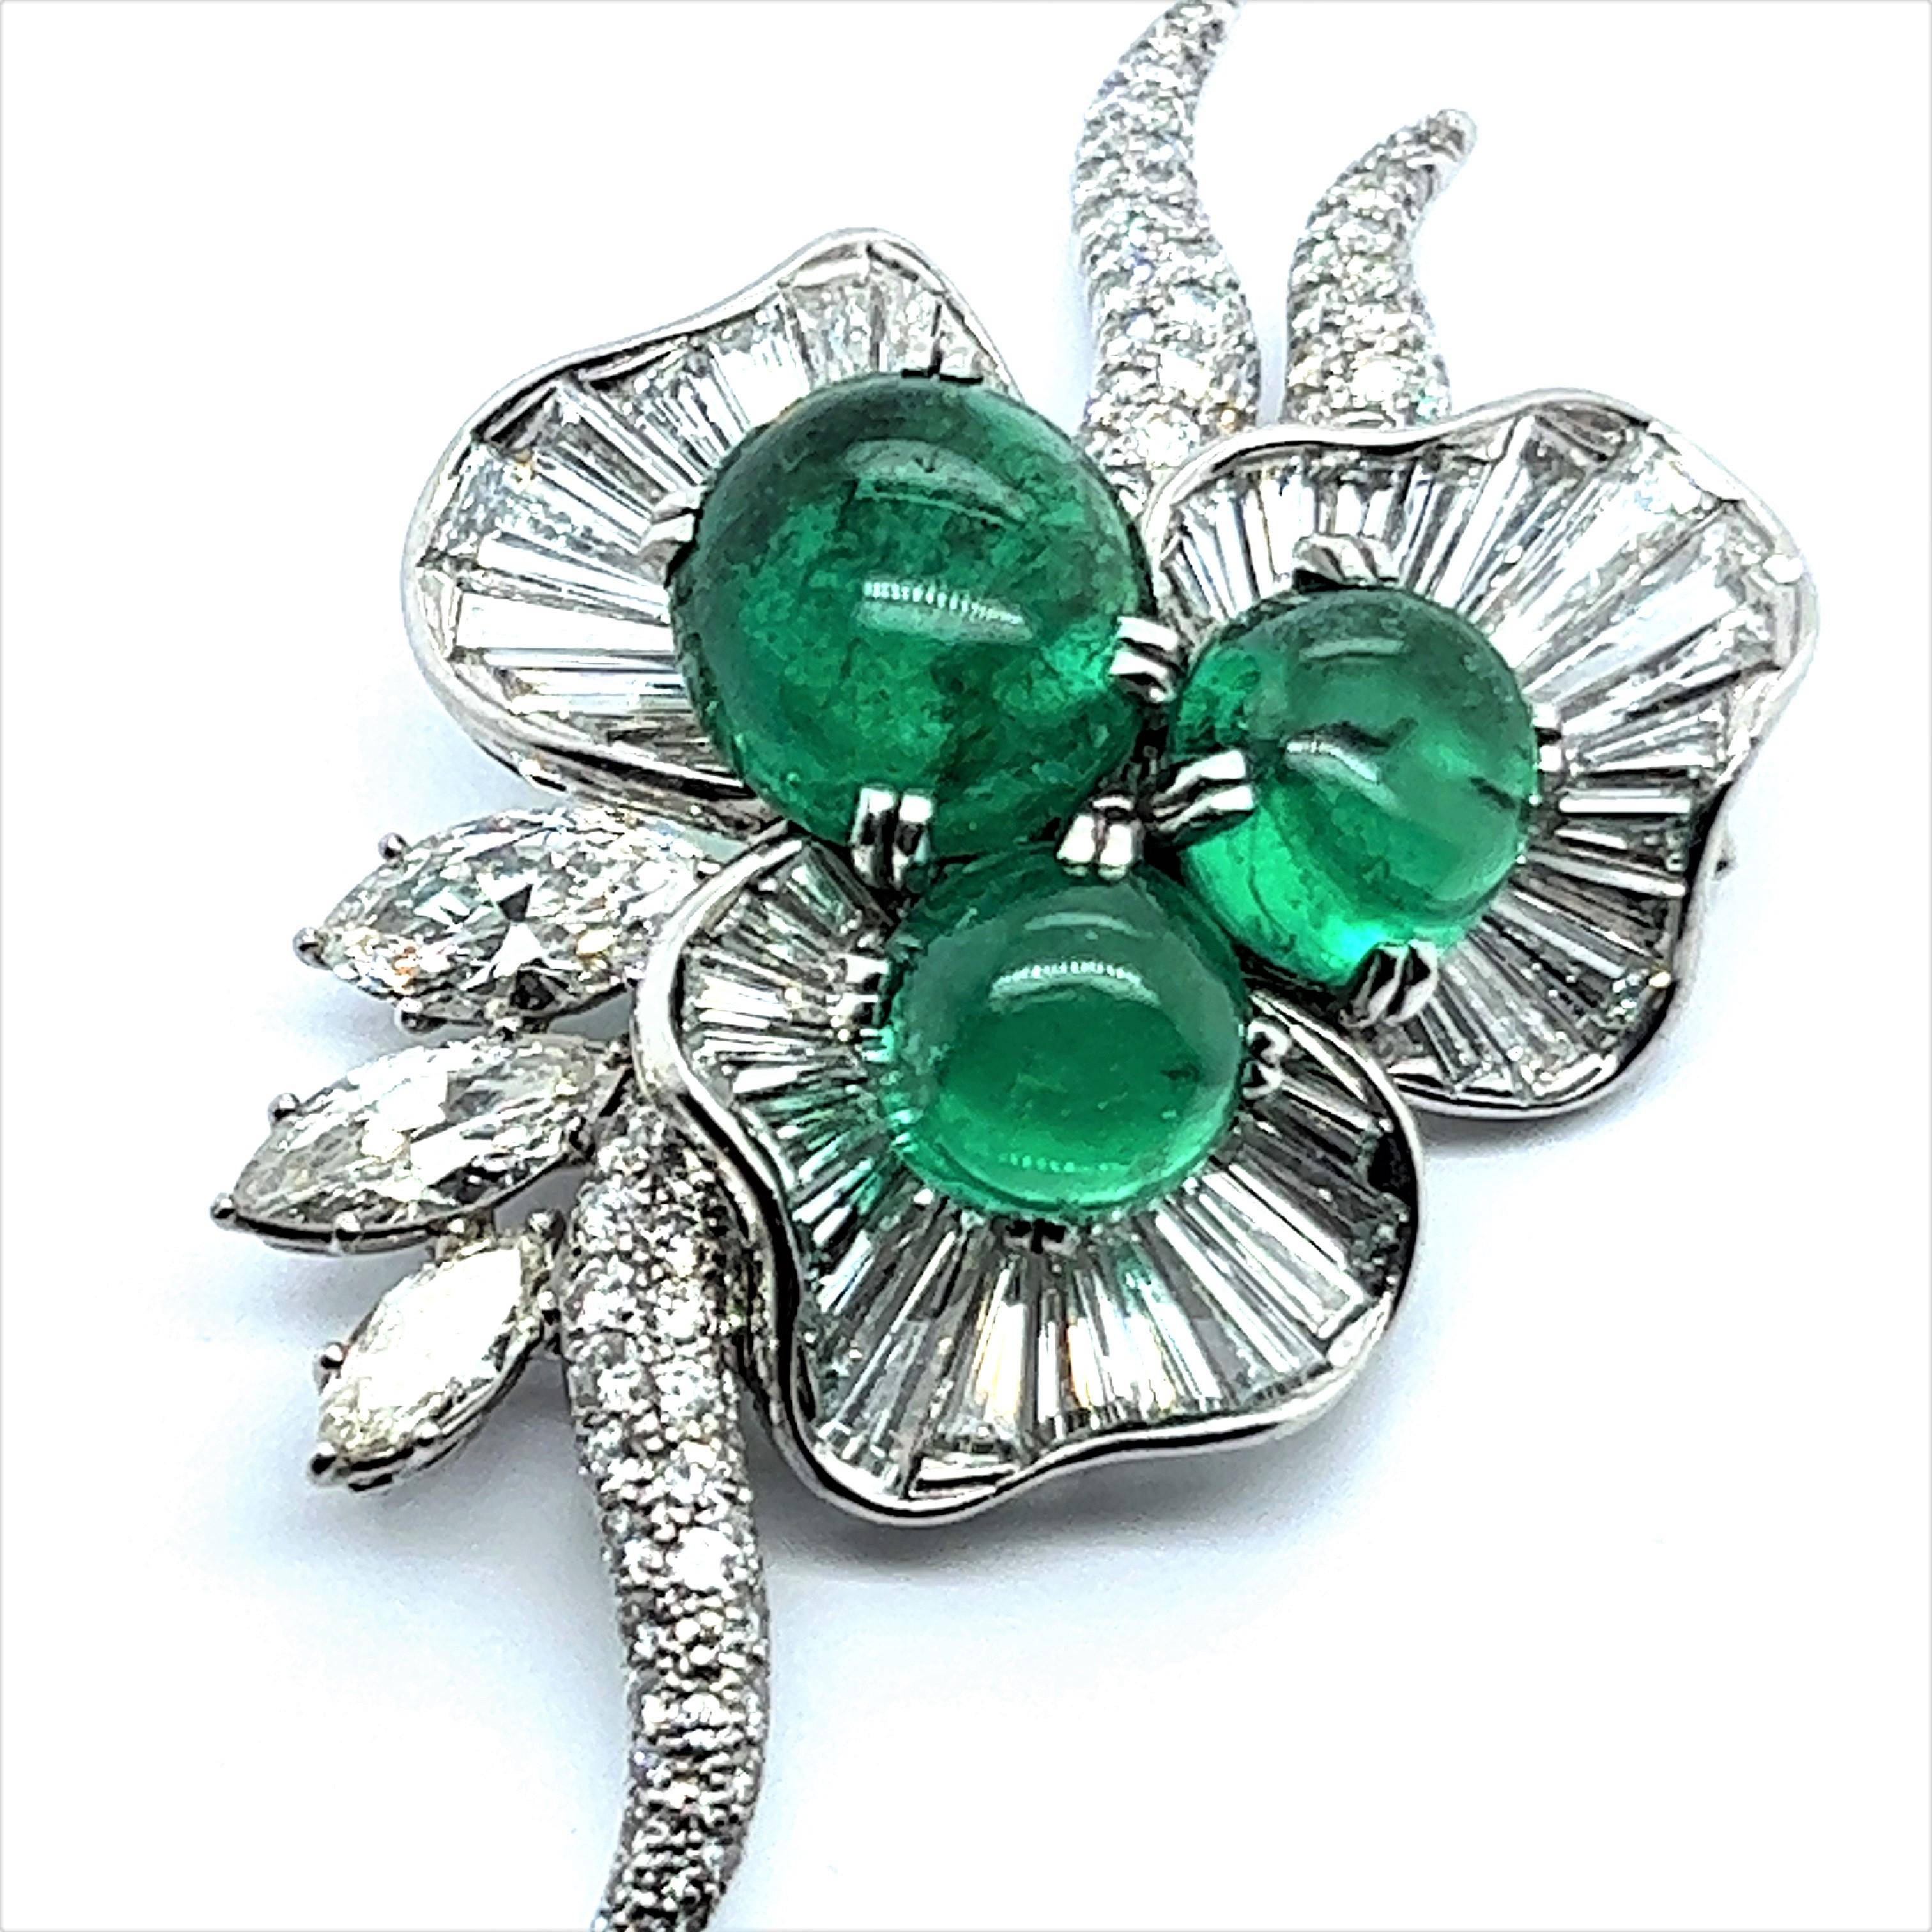 The emerald has one of the longest histories and widest recognition of any gemstone through the ages. Known since the days of Ancient Egypt, for hundreds of years they have been worn by kings, queens and the highest ranks in society. 

Today,